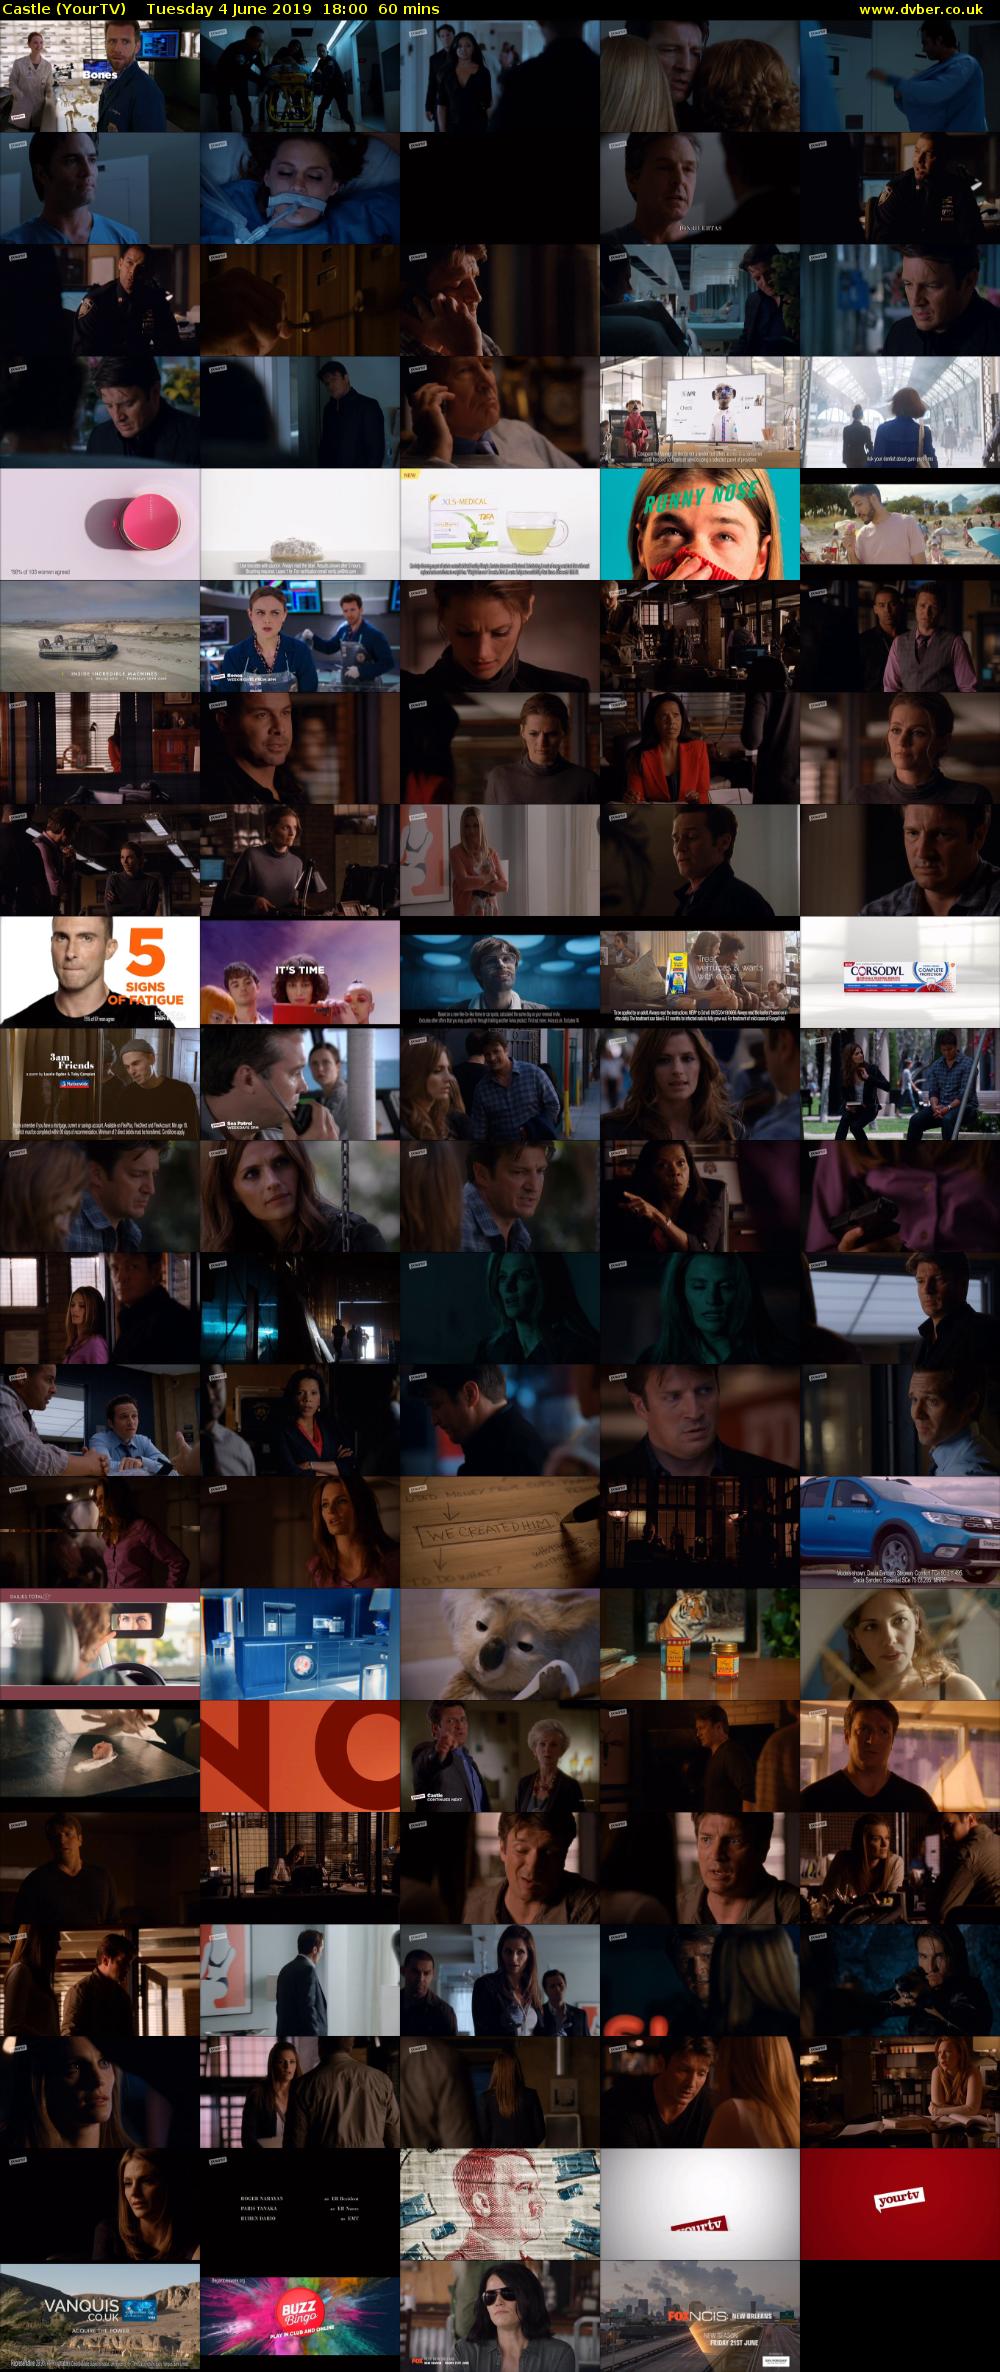 Castle (YourTV) Tuesday 4 June 2019 18:00 - 19:00